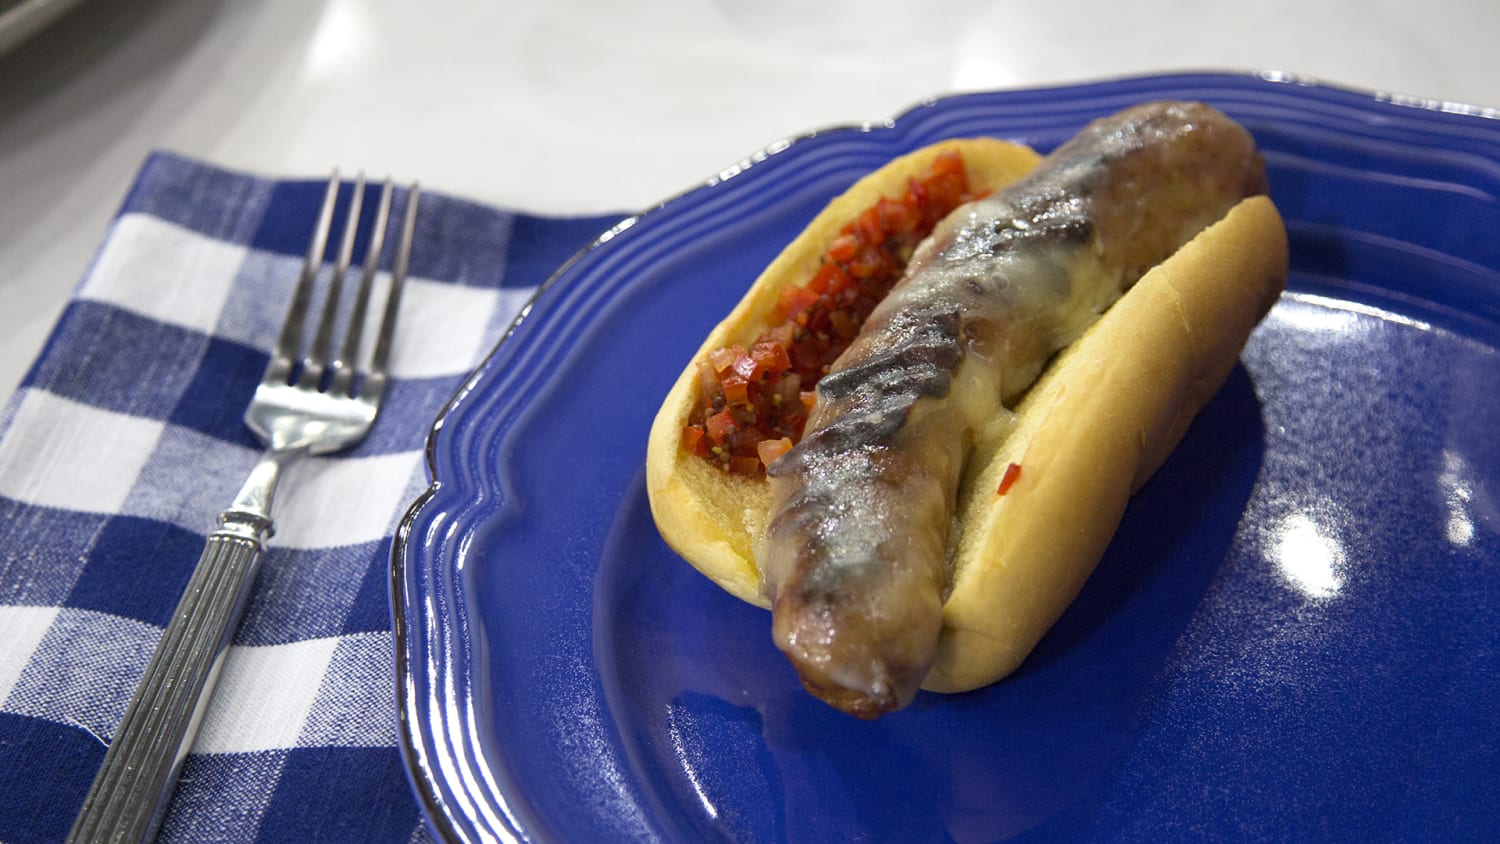 Hot dogs with sweet onion and capsicum relish